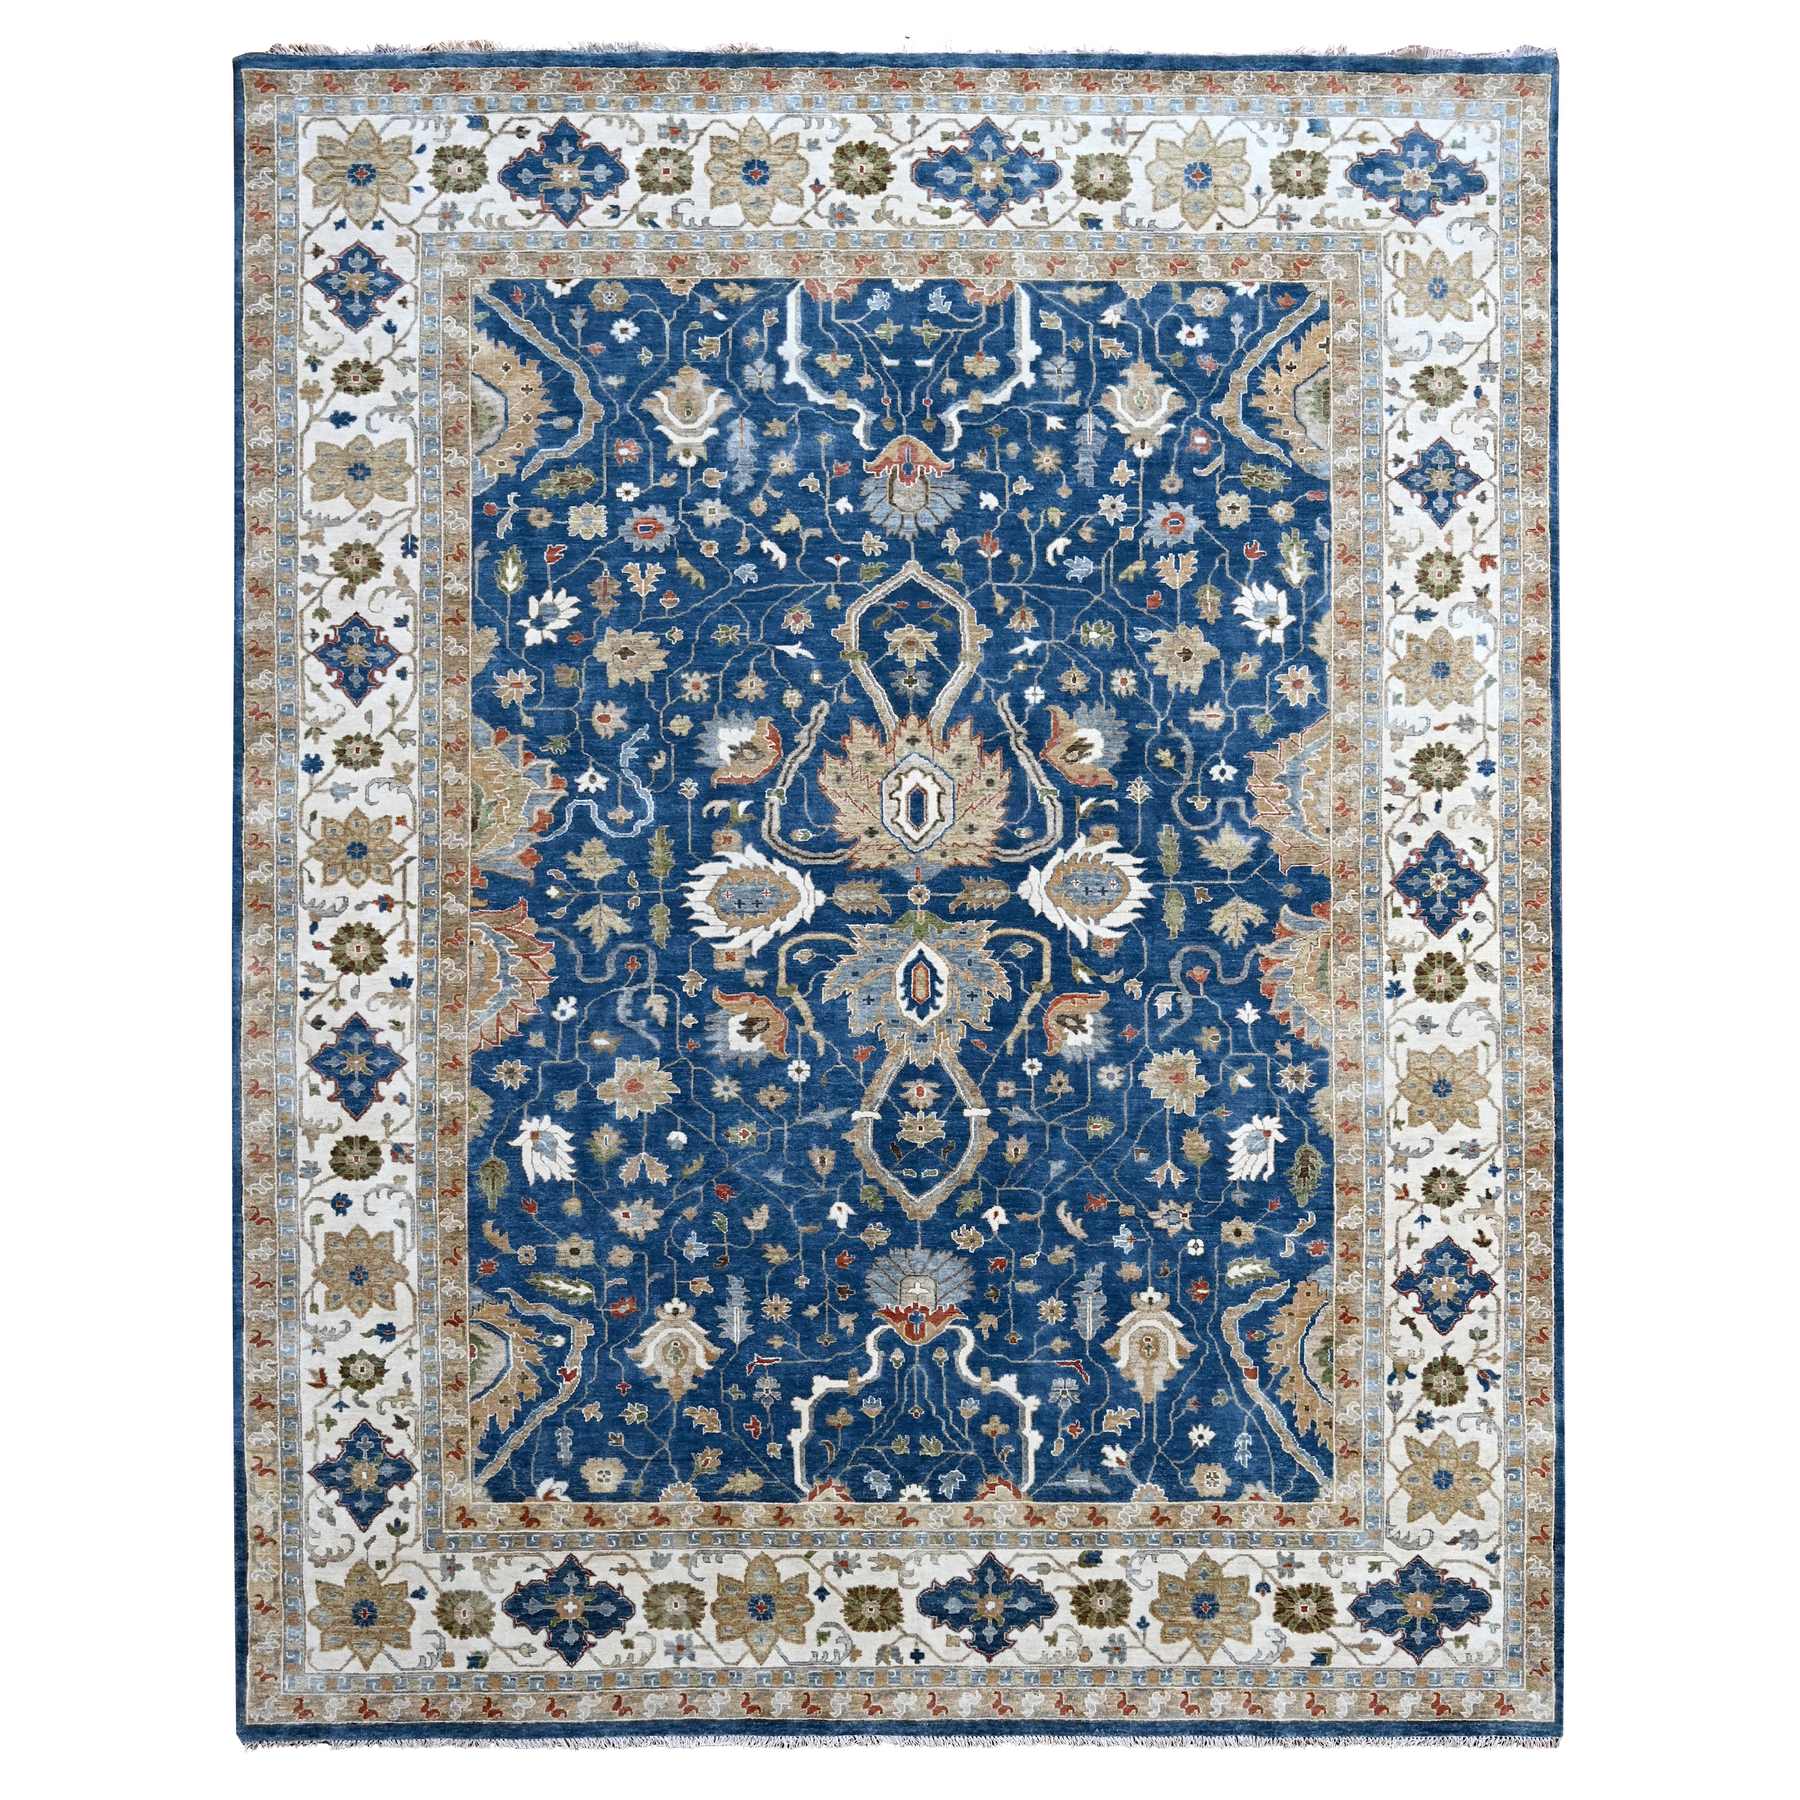 Patriot Blue, Pure Wool Sultanabad All Over Design, Hand Knotted, Oriental Rug